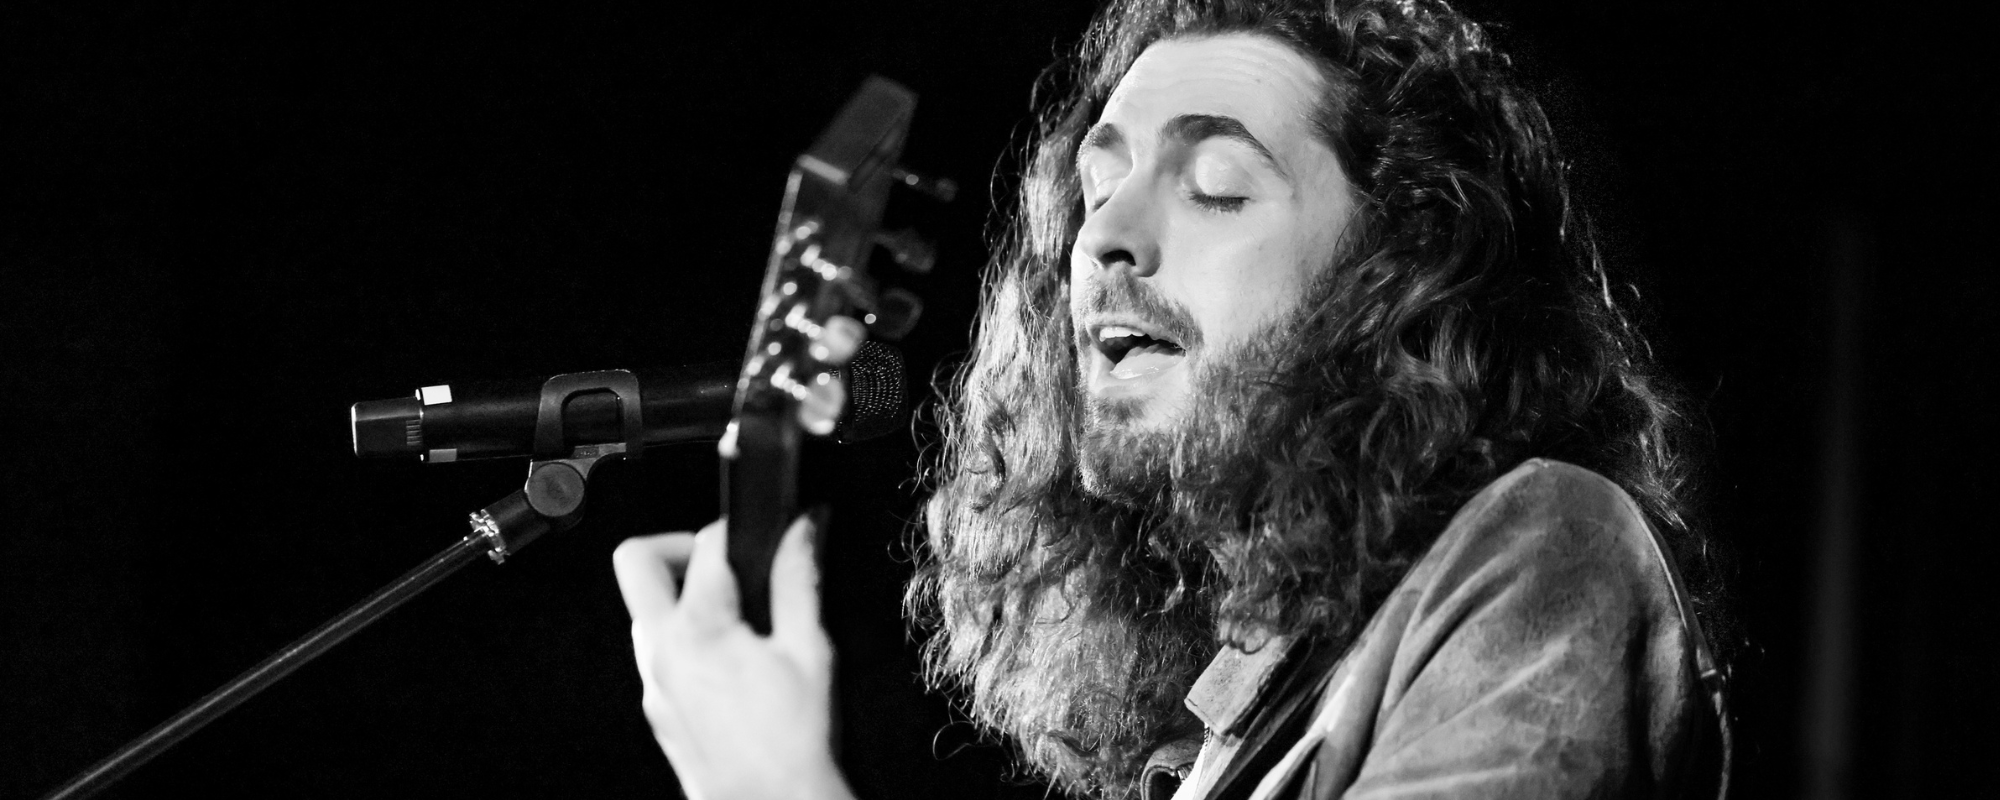 Hozier Unreal Unearth World Tour 2023-2024: How To Buy Tickets And Upcoming Dates